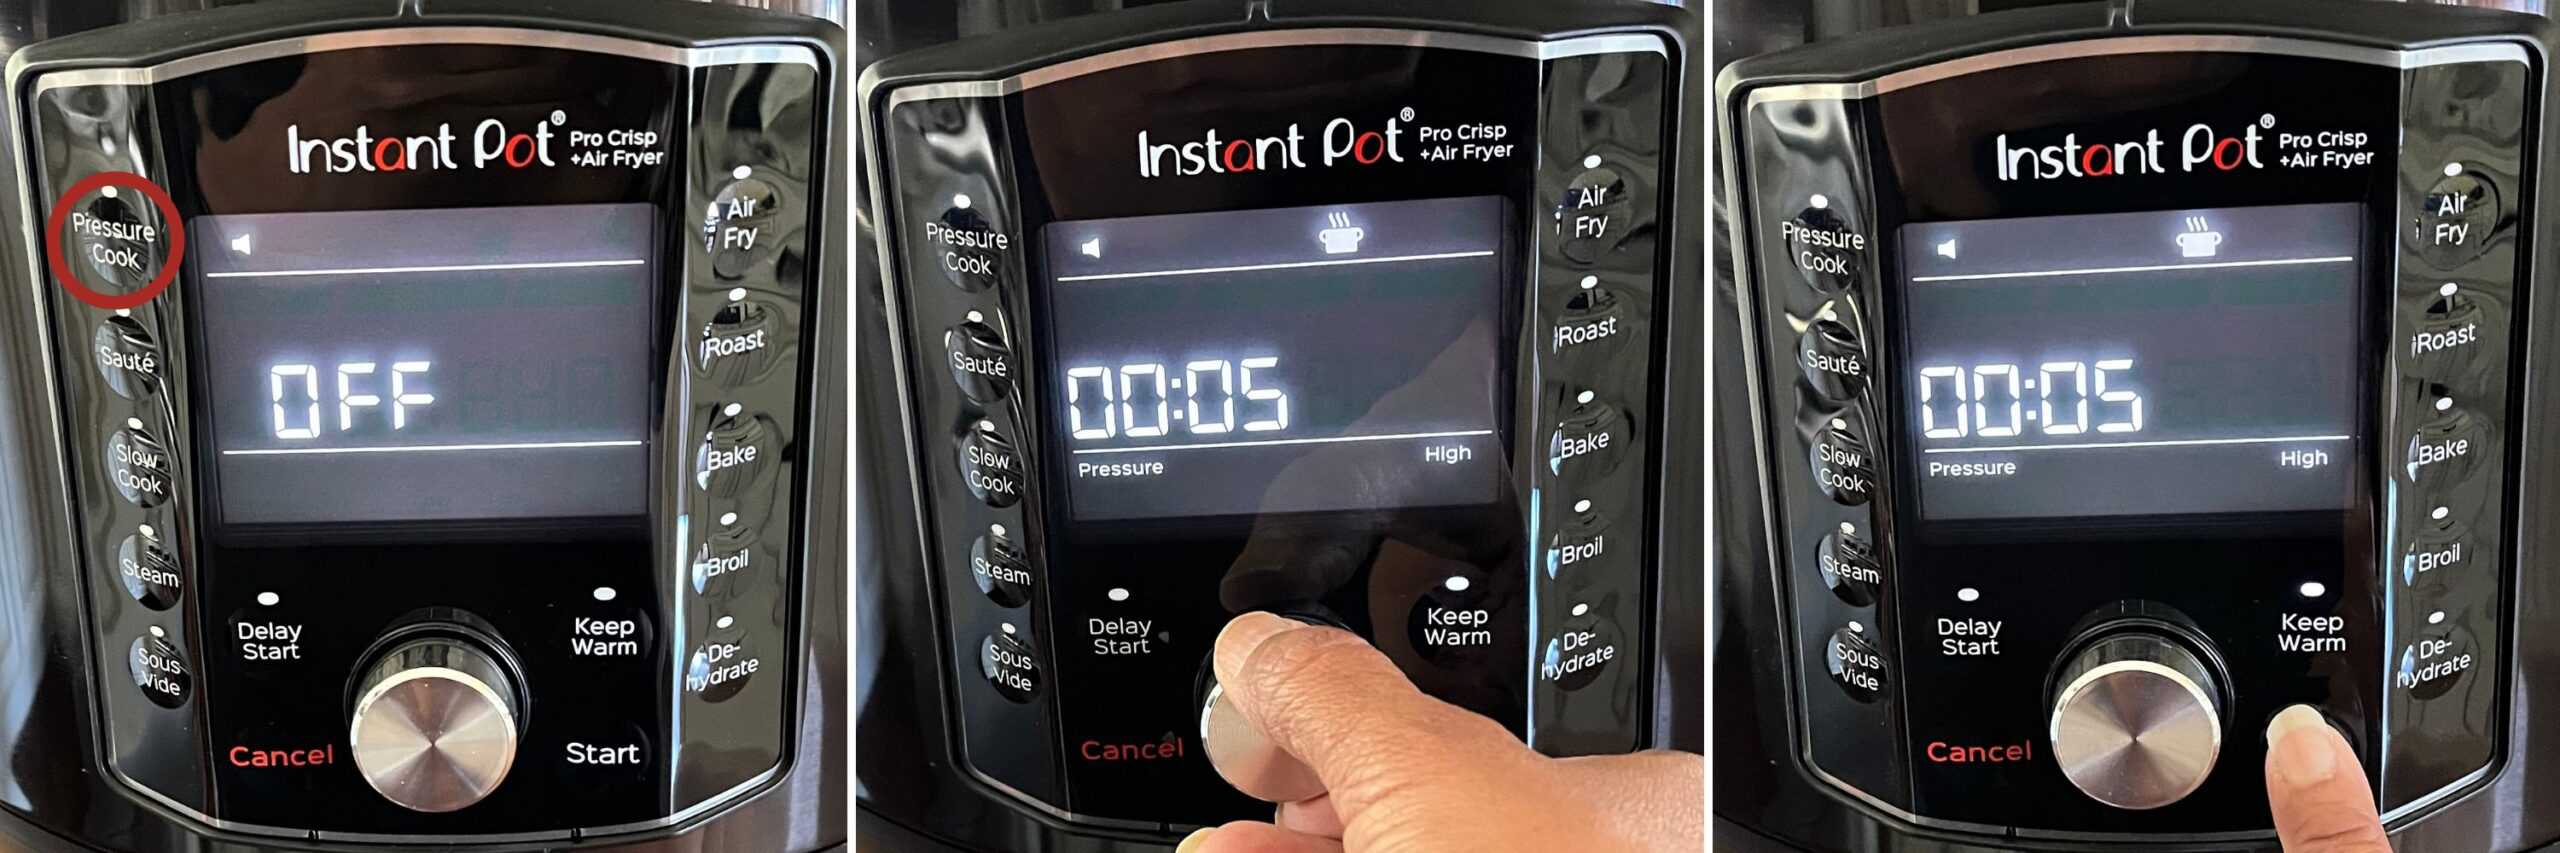 Instant Pot Pro water test collage